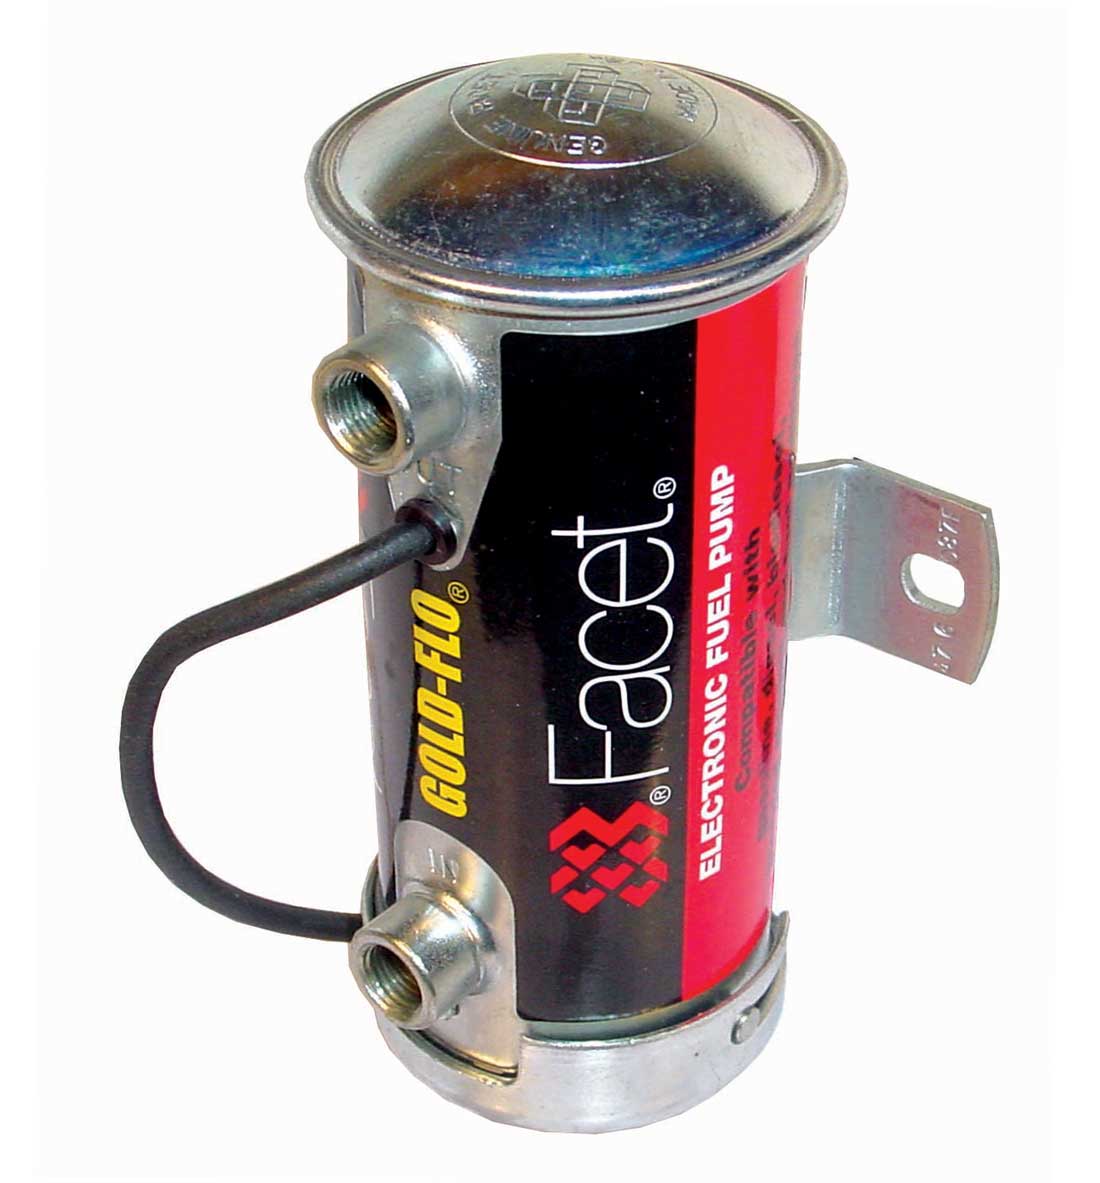 Facet Cylindrical Red Top Fuel Pump 6-8 PSI - 45 GPH